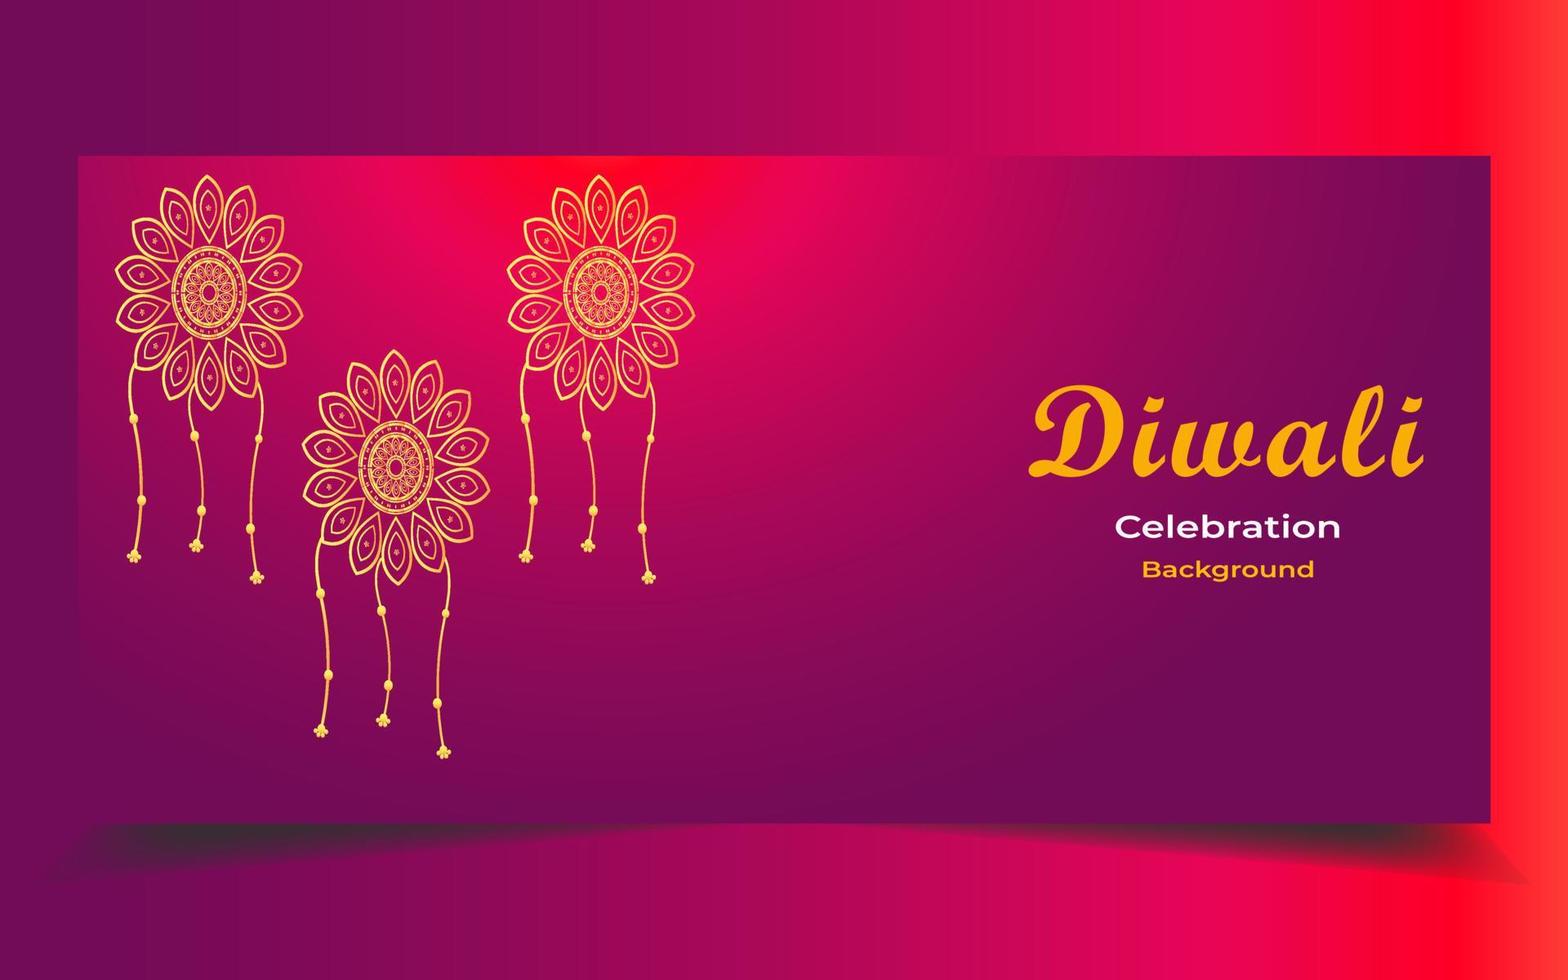 Diwali festival background design, excellent creating colorful triangles bright concept round or circle shape with lighting background and oil lamps vector